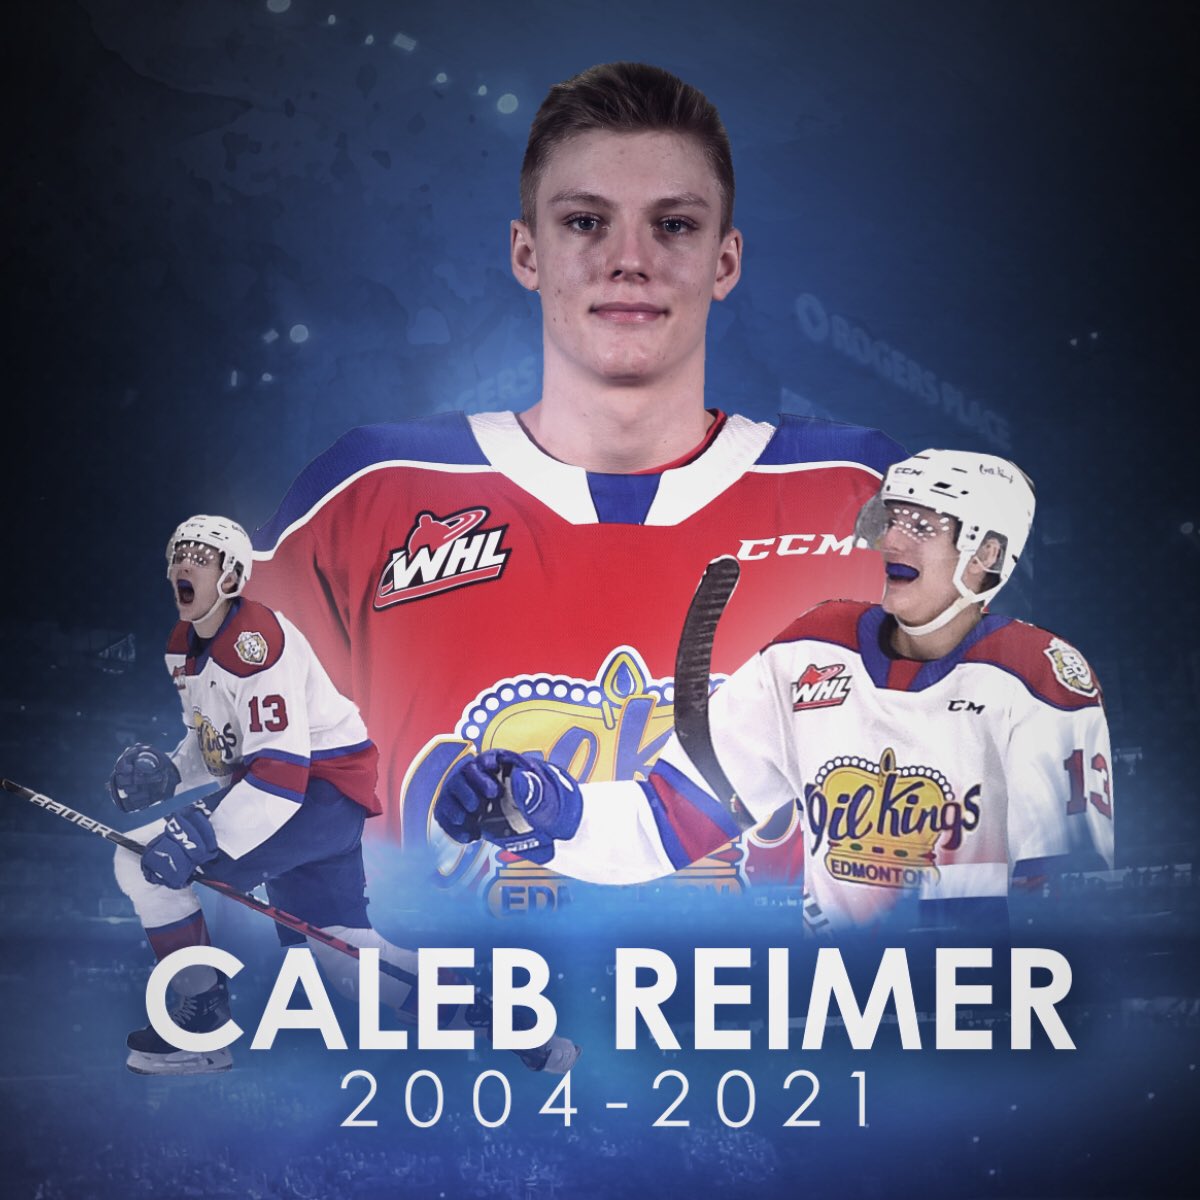 We are deeply saddened to learn of the tragic passing of #OilKings 2019 first-round draft pick Caleb Reimer at the age of 16. Caleb was part of our family & will be a tremendous loss in all of our hearts. Full statement: oilkings.ca/article/statem…